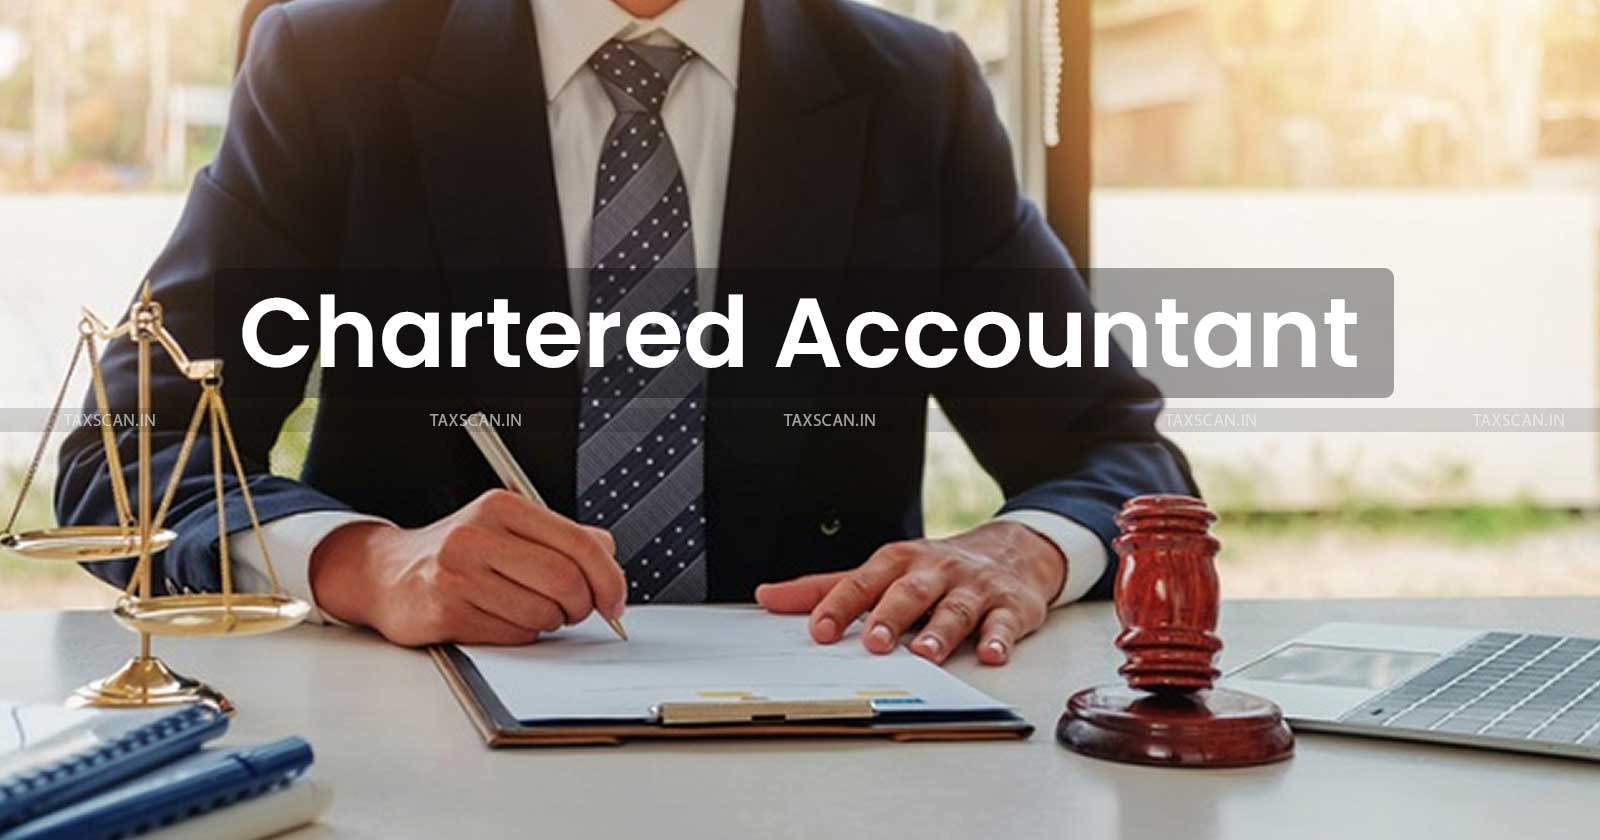 Chartered Accountant Pictures  Download Free Images on Unsplash